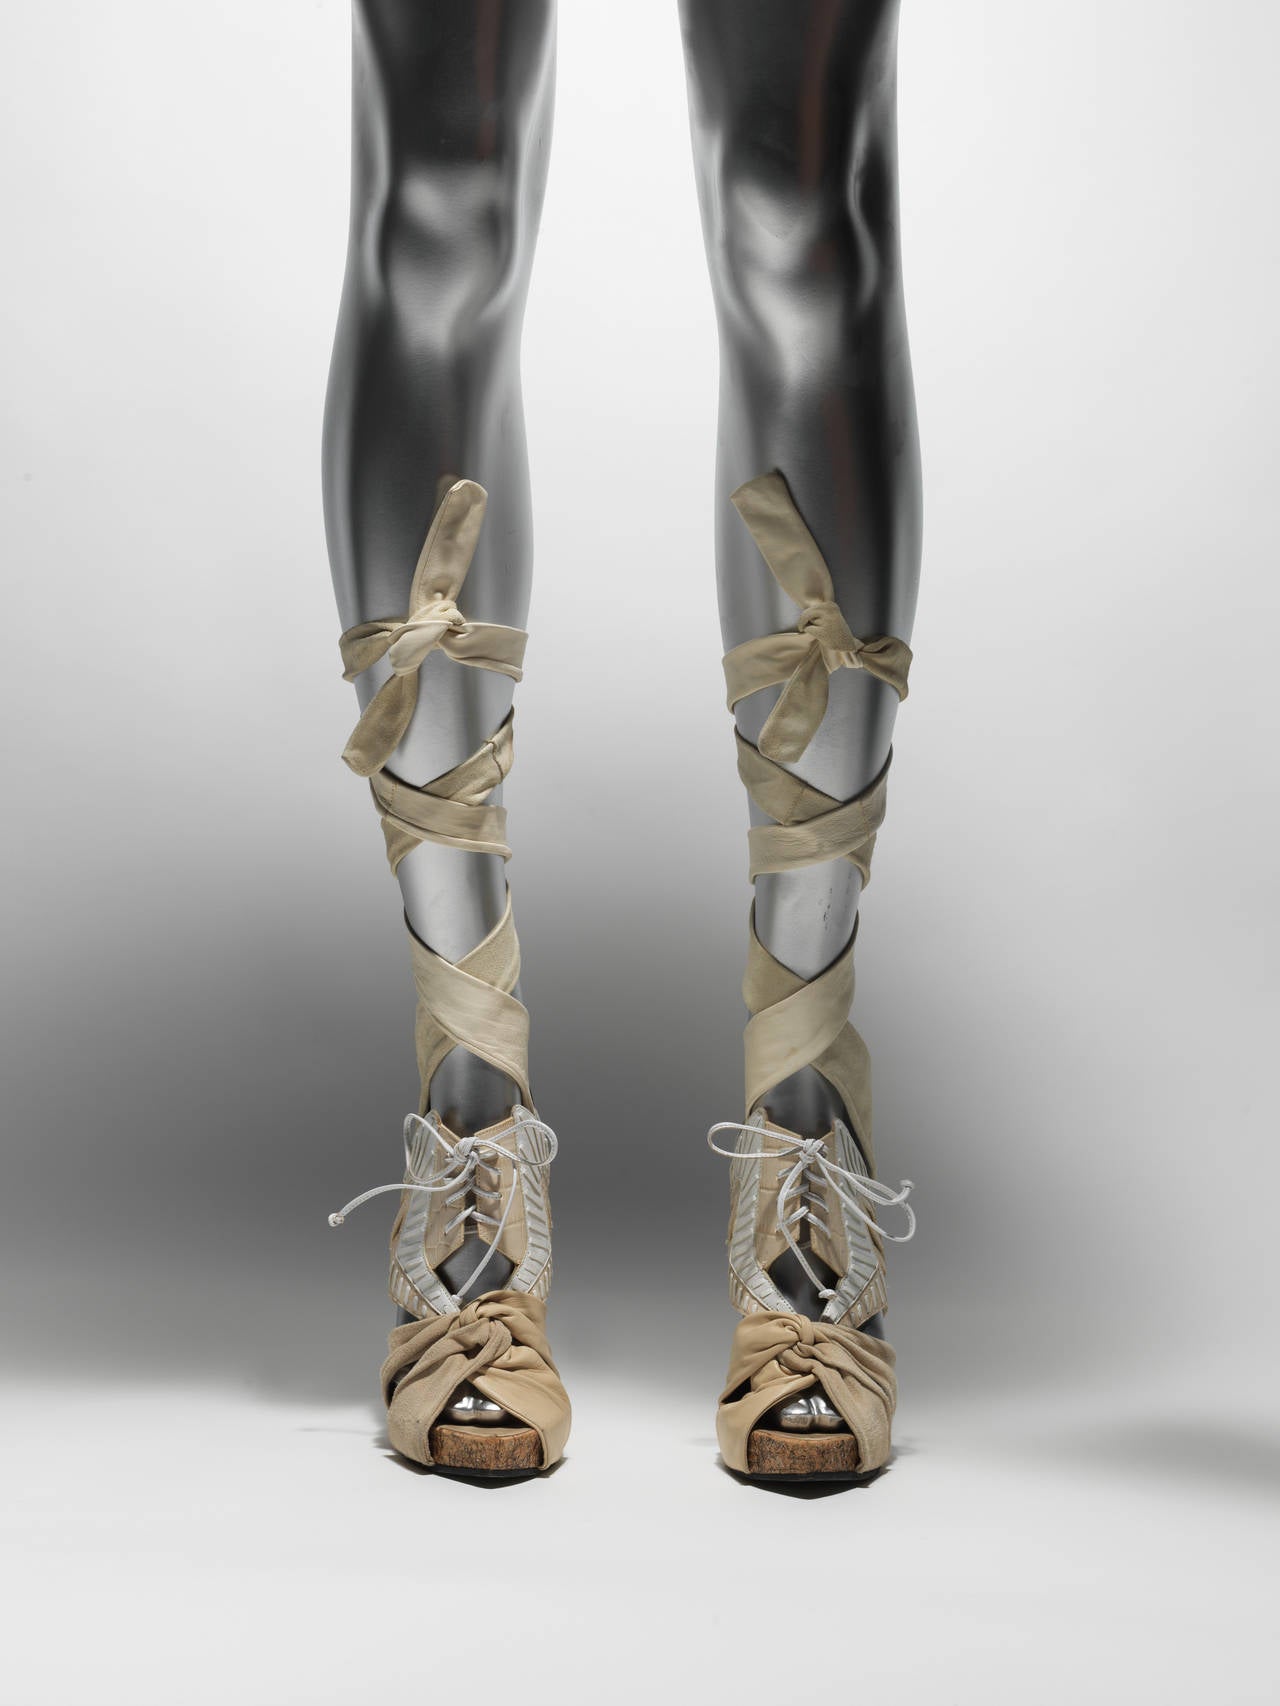 Nicholas Kirkwood for Rodarte, Fall 2010 beige, creme, black suede and embossed leather sandals with wrap-around suede ankle ties, front lace closure and melted effect heels.
Heels 6.5"